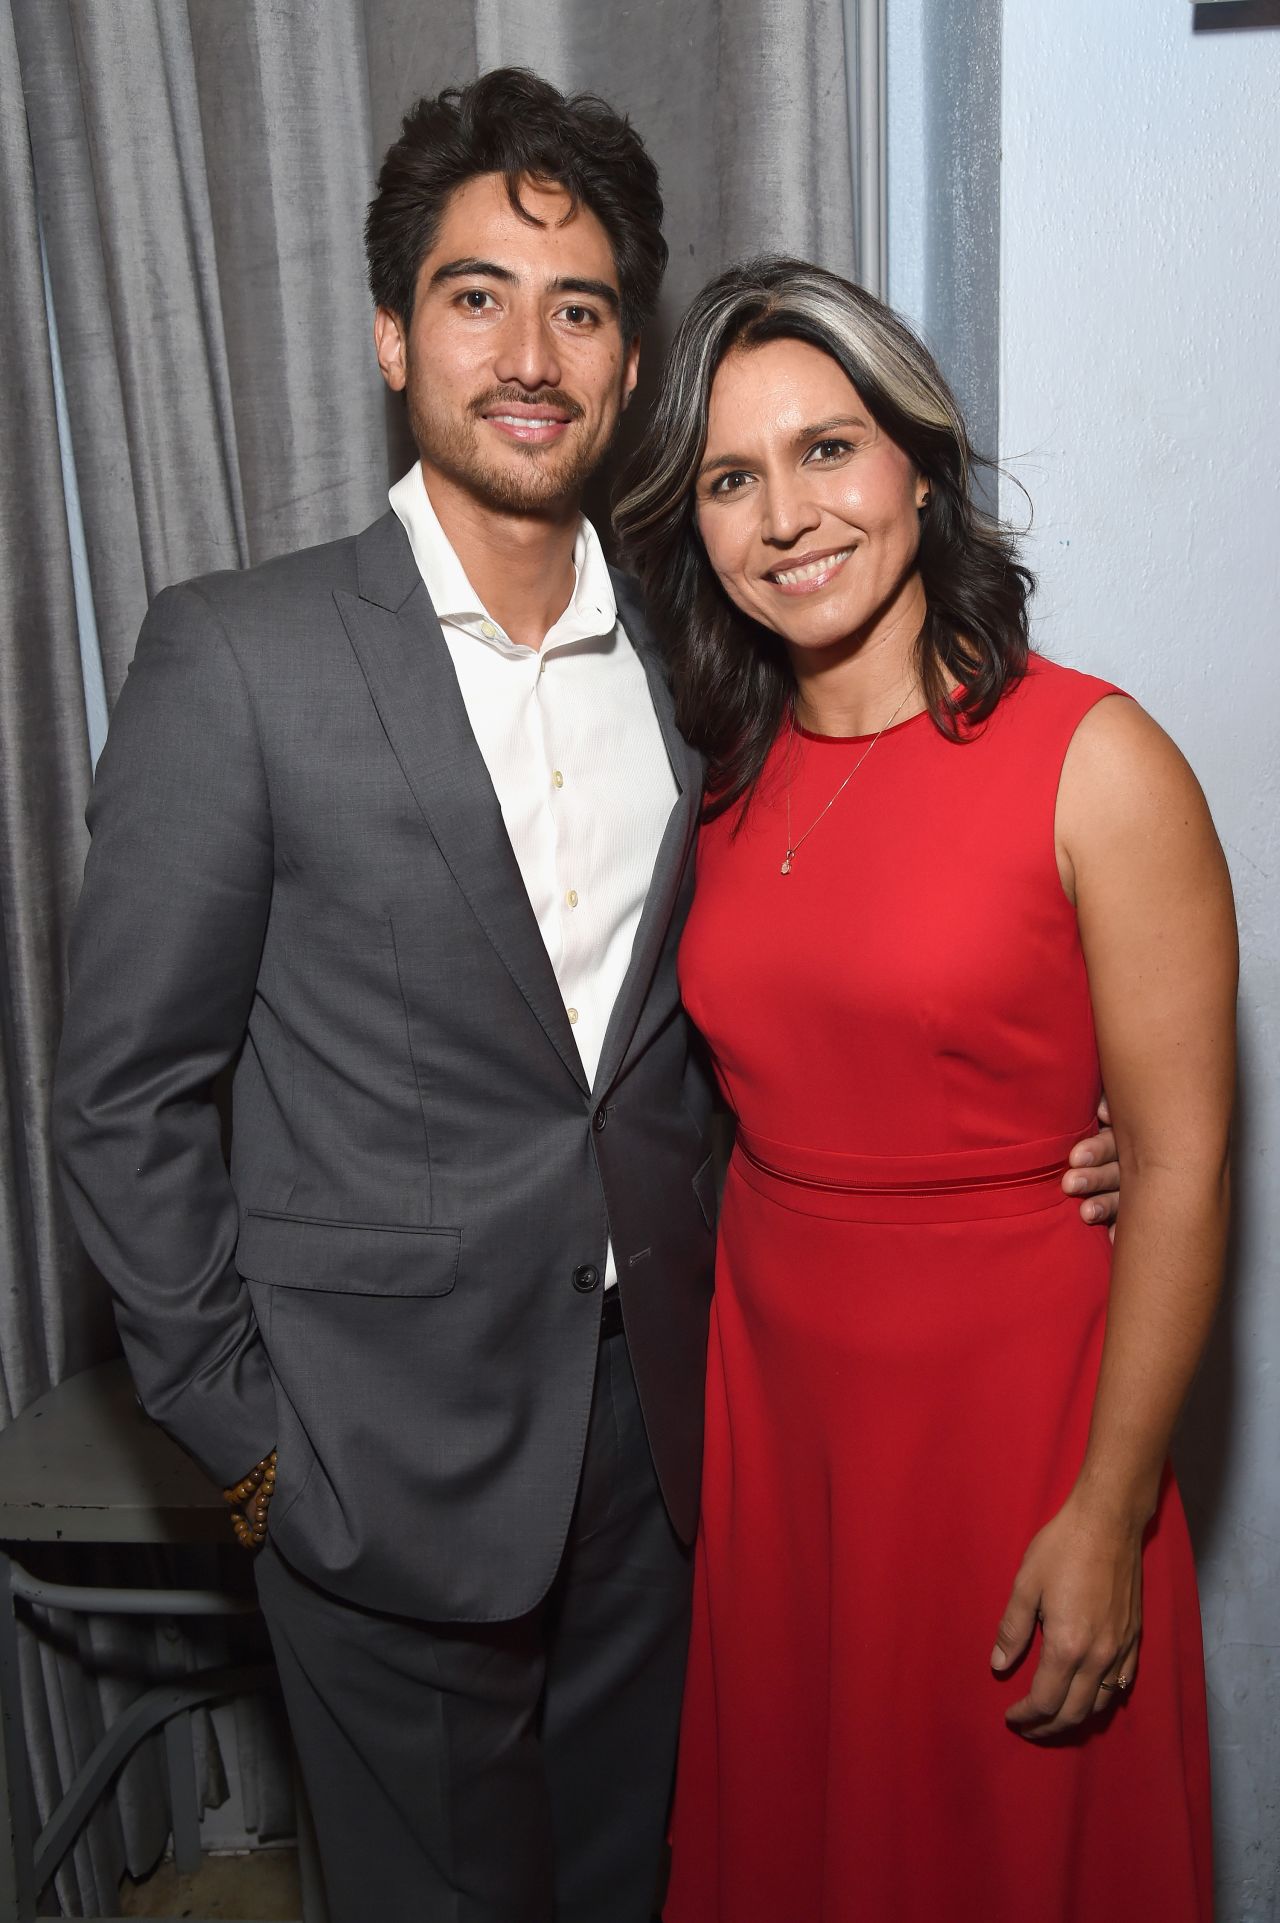 Gabbard and her husband, Abraham Williams, attend a charity event in Los Angeles in January 2019.